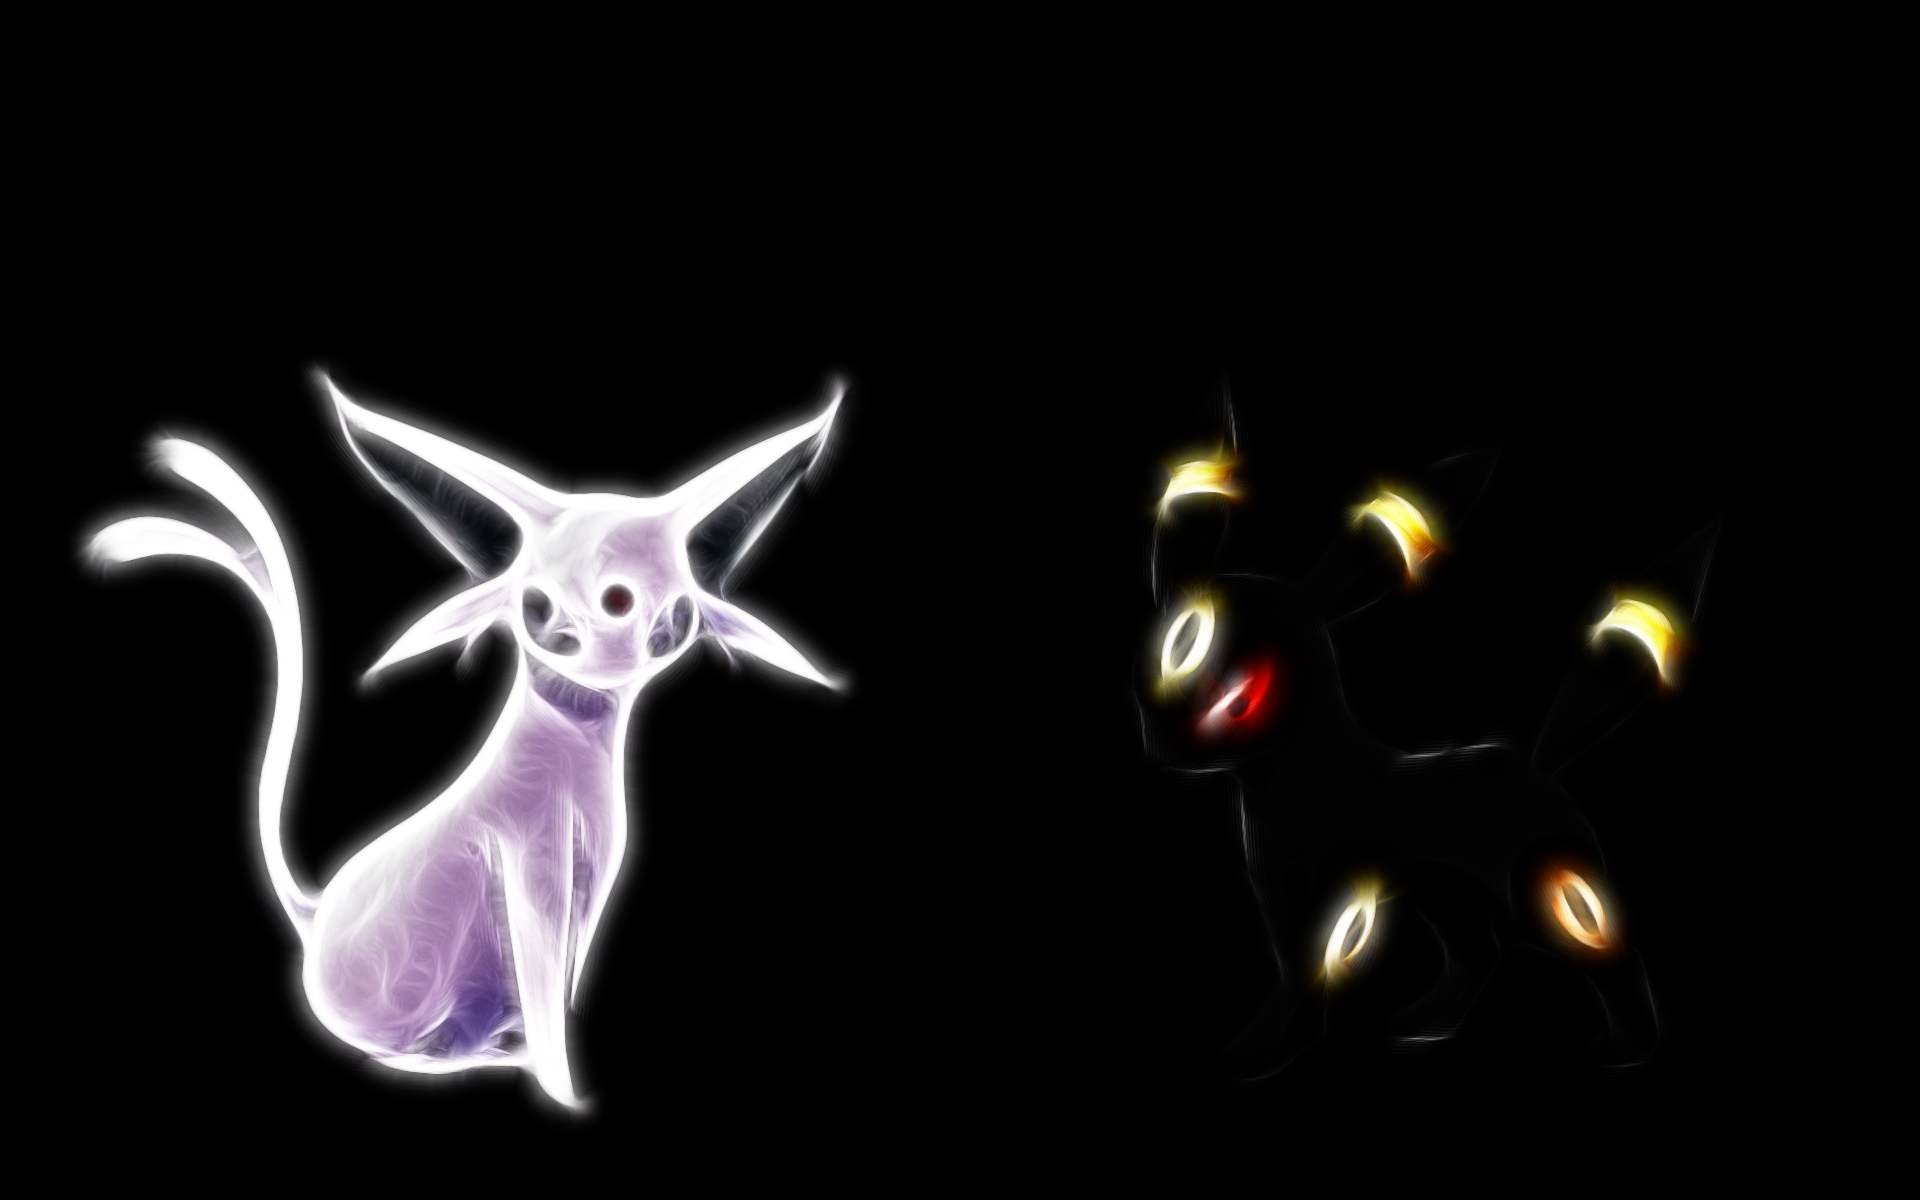 1920x1200 Download the Pokemon anime wallpaper titled: 'Espeon and Umbreon'.